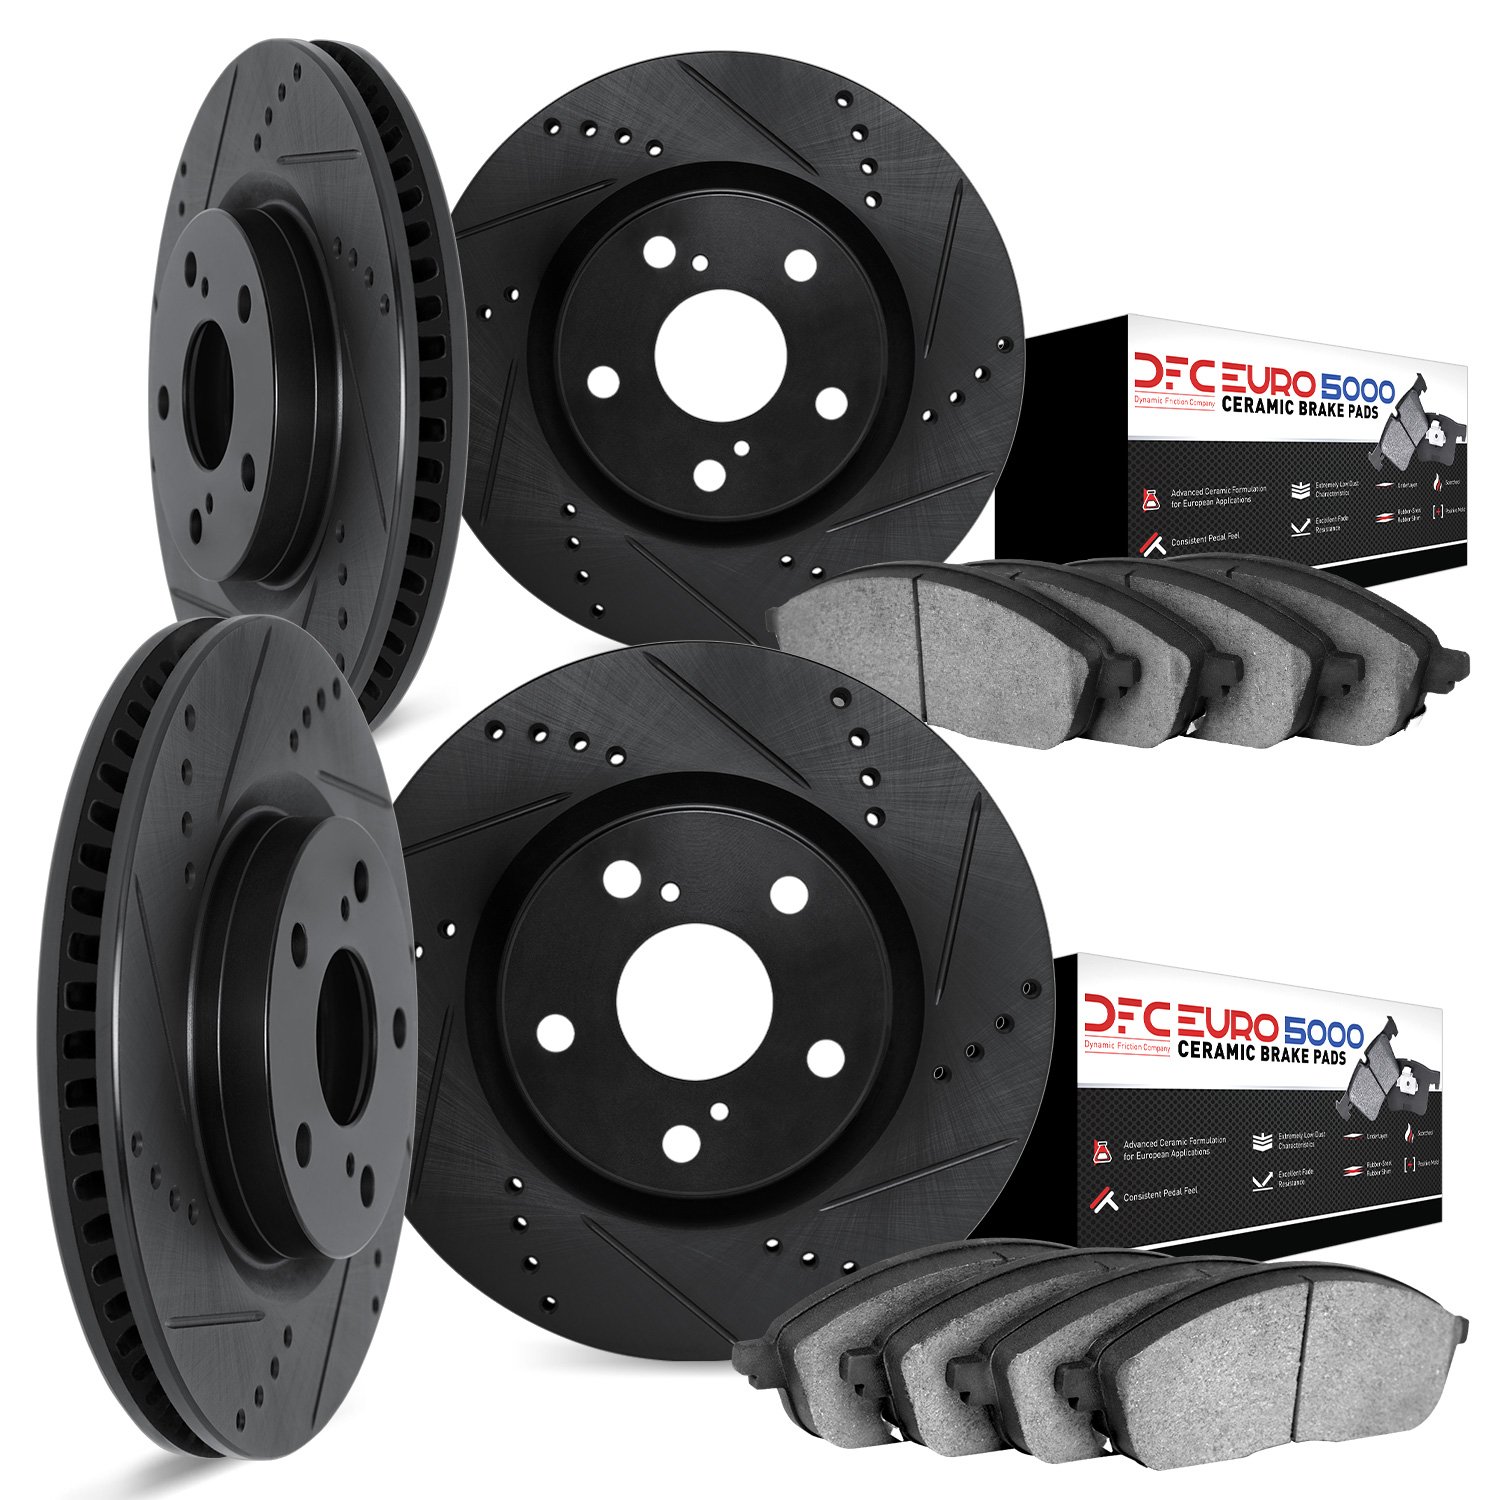 8604-46001 Drilled/Slotted Brake Rotors w/5000 Euro Ceramic Brake Pads Kit [Black], 2009-2015 GM, Position: Front and Rear